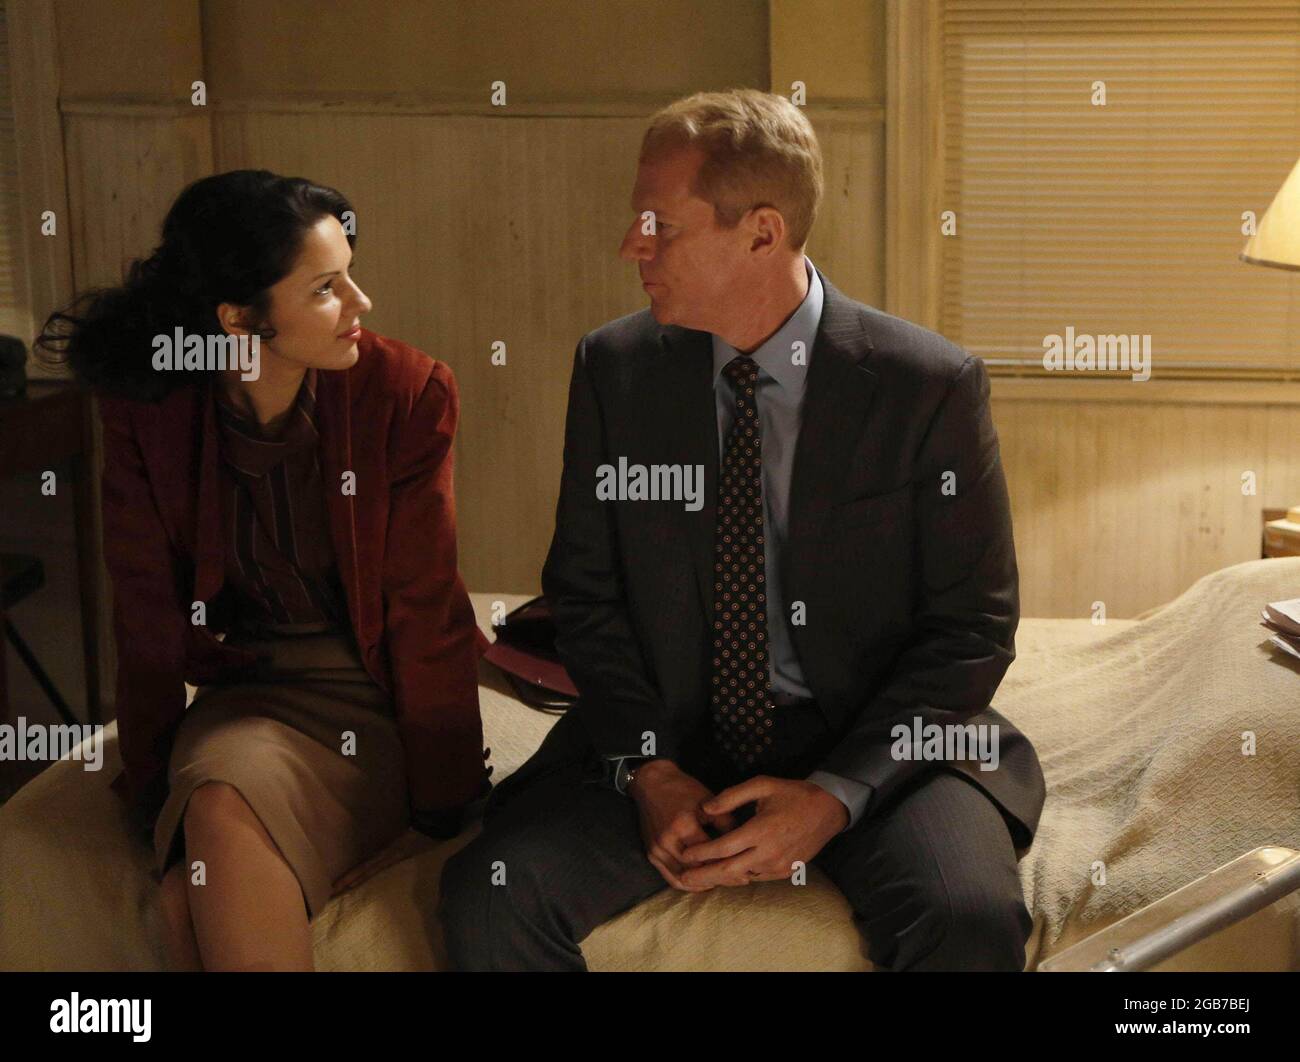 Los Angeles. CA. USA. Noah Emmerich and Annet Mahendru  in the ©FX new TV series: The Americans (2013). The story centers on Russian deep-cover spies operating in the United States in the 1980s.  Ref:LMK106-44290-280513 Supplied by LMKMEDIA. Editorial Only. Landmark Media is not the copyright owner of these Film or TV stills but provides a service only for recognised Media outlets. pictures@lmkmedia.com Stock Photo